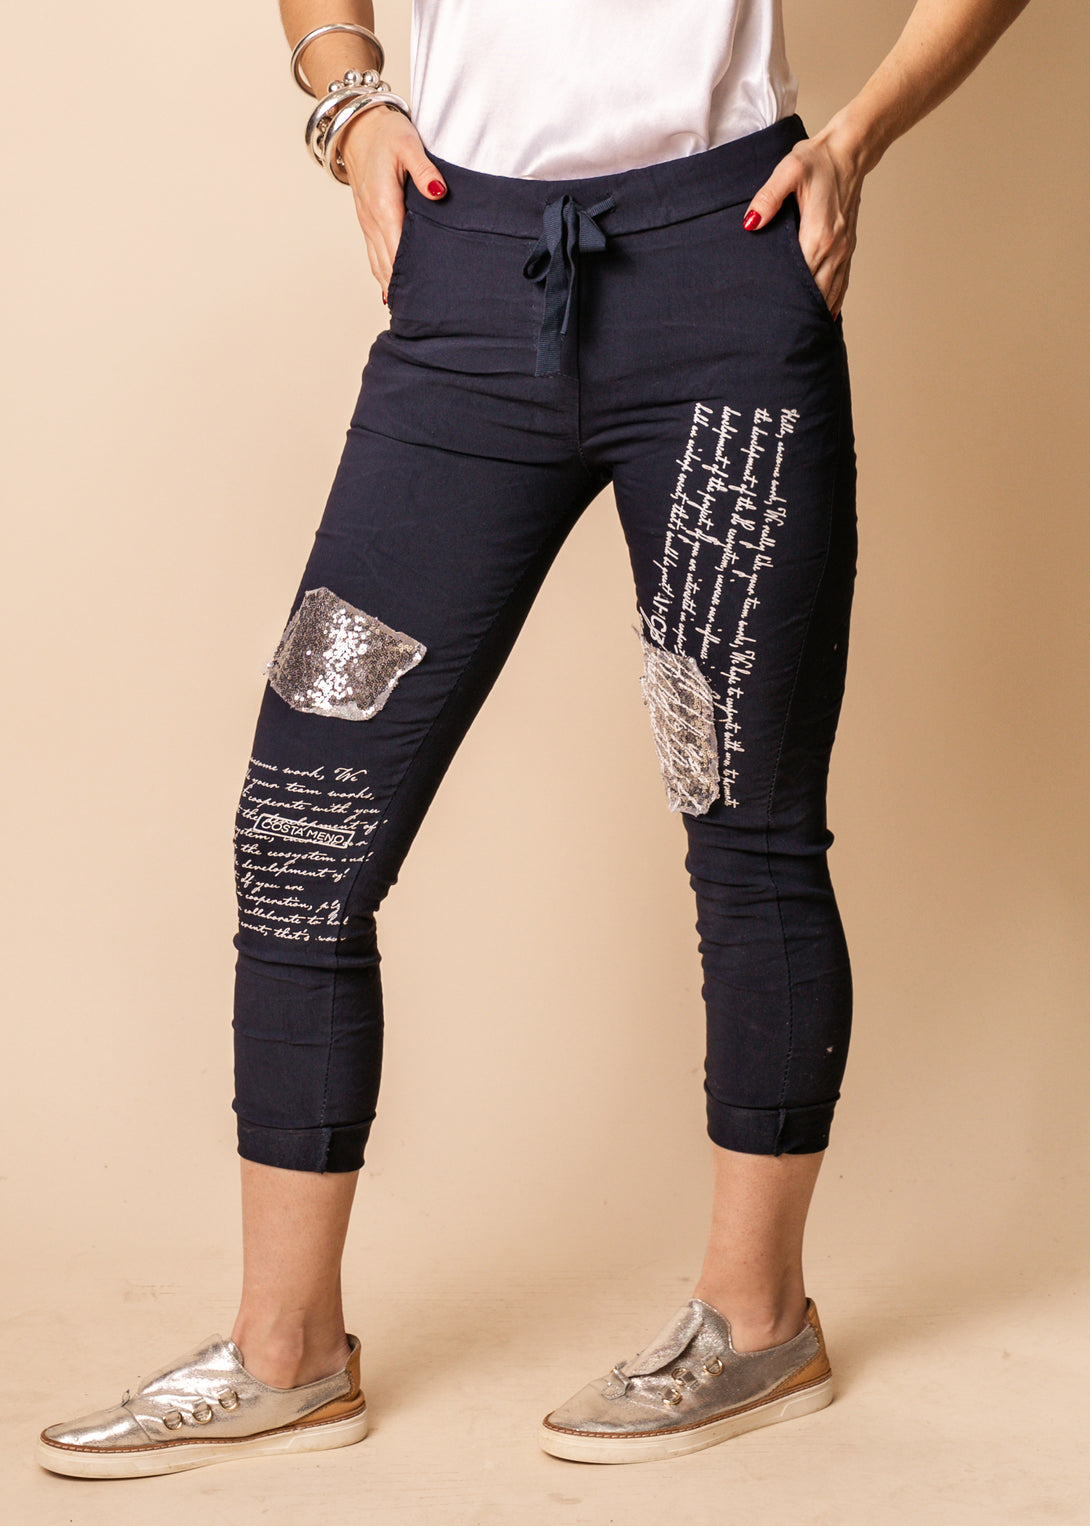 Avery Cotton Blend Pants in Navy - Imagine Fashion